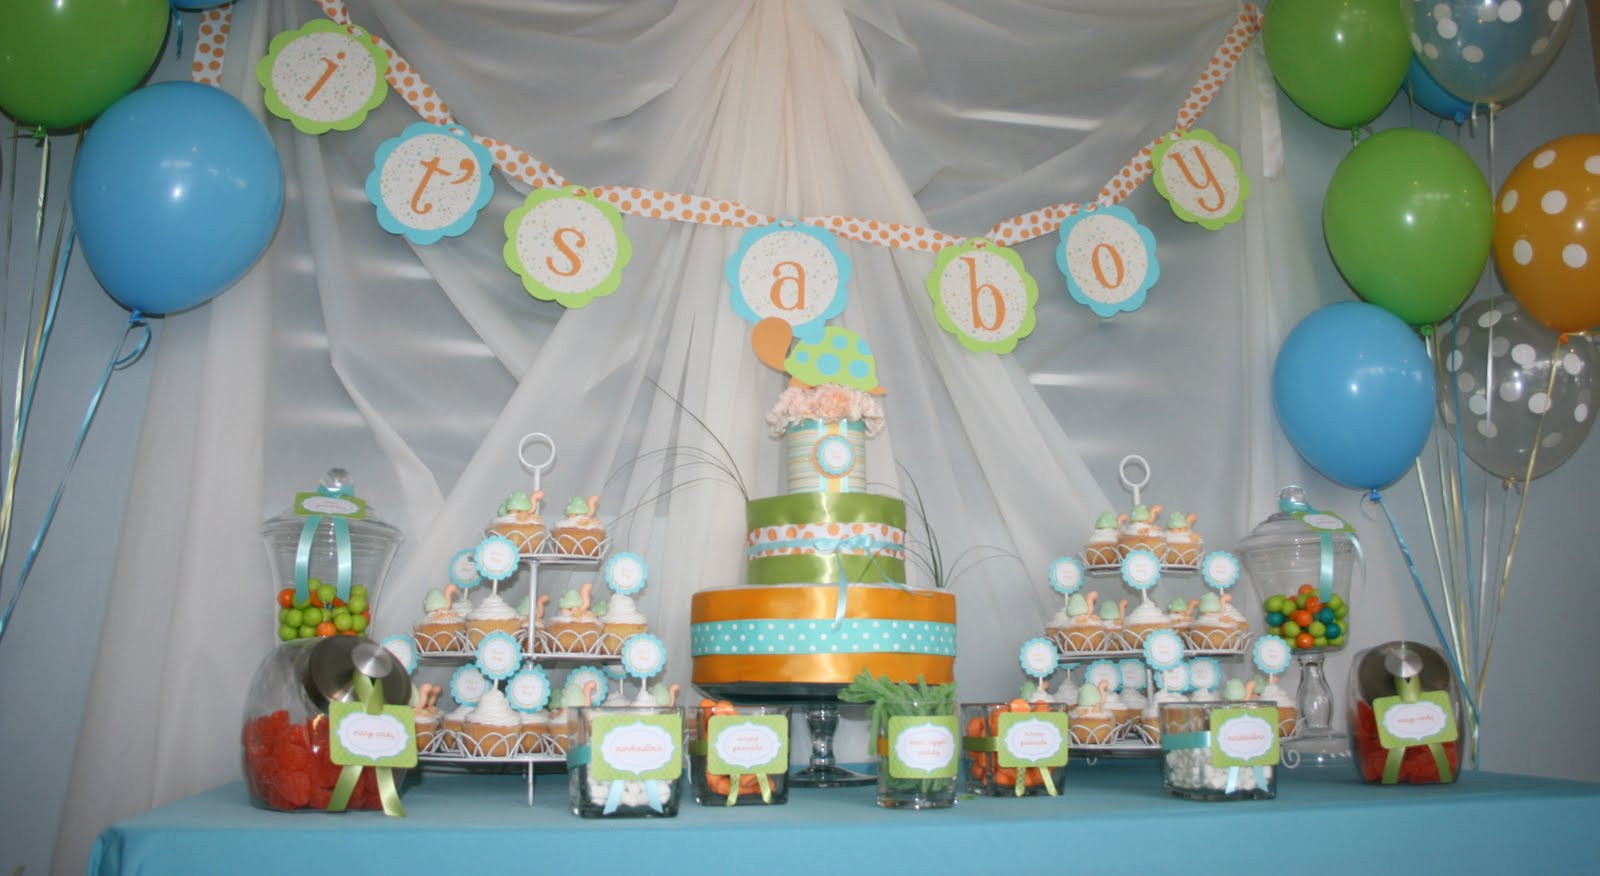 Ideas For Baby Shower Decorations
 Partylicious Events PR Turtle Baby Shower